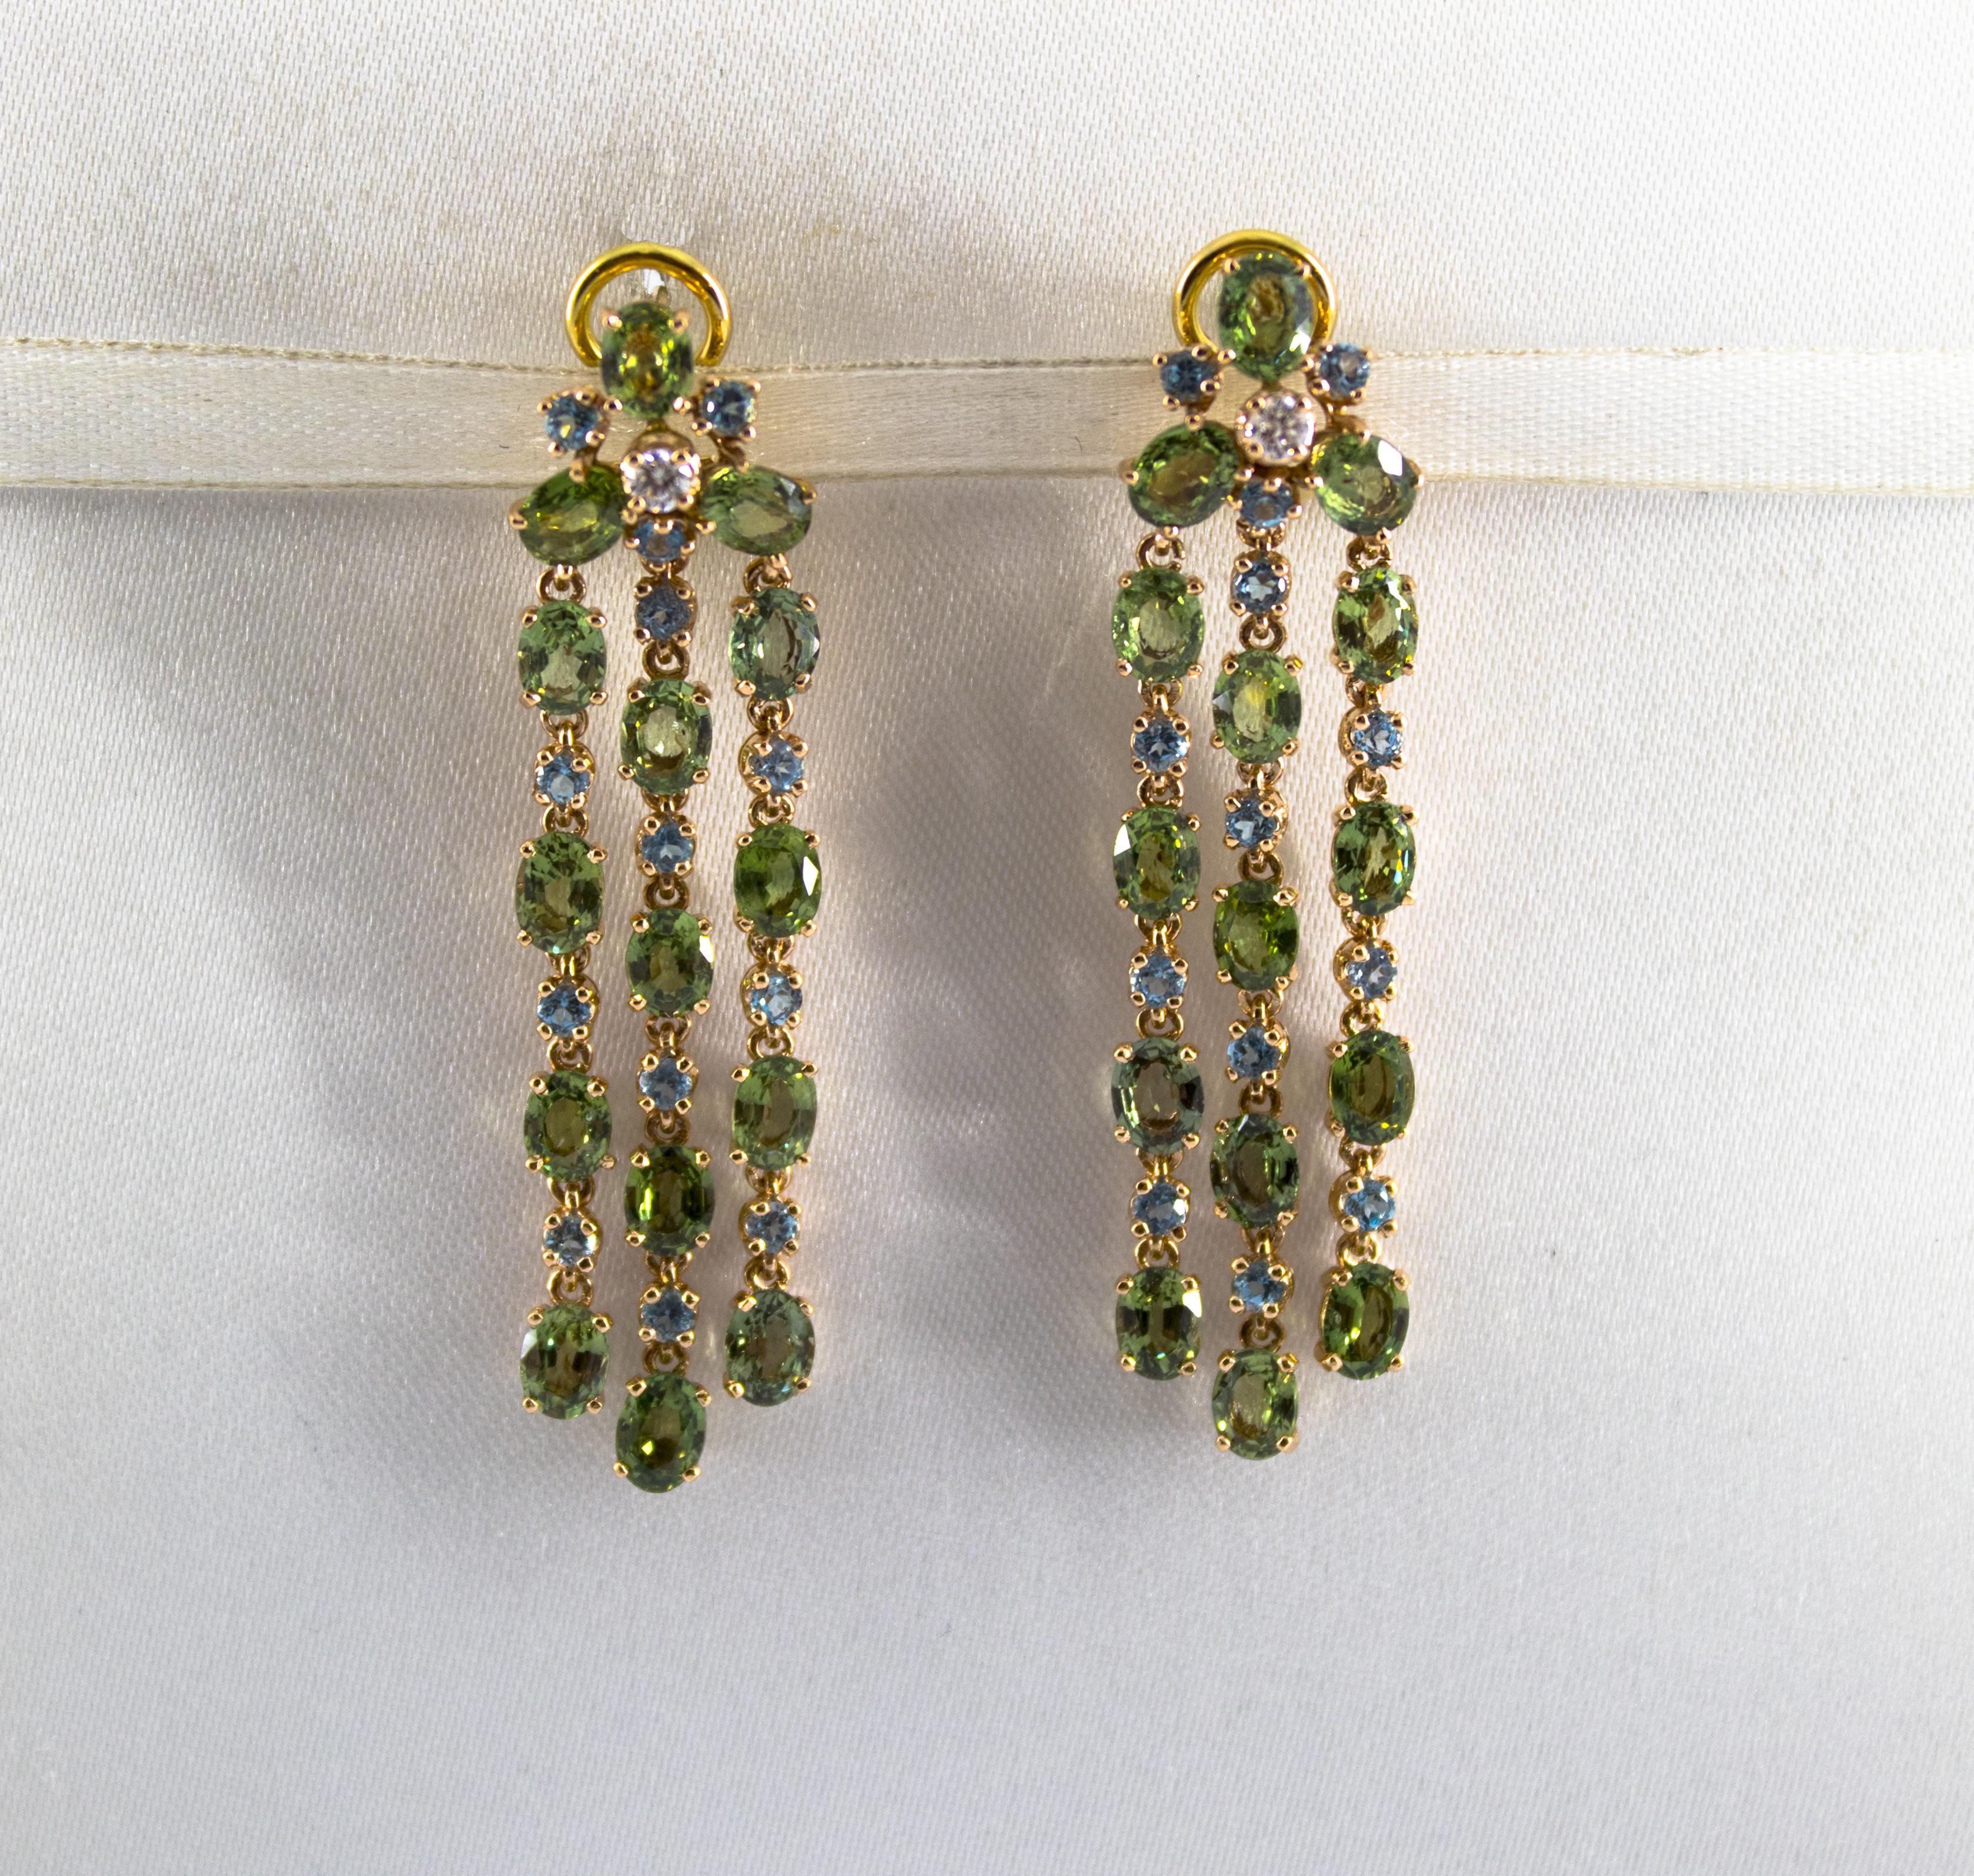 These Earrings are made of 14K Yellow Gold with 18K Yellow Gold Clips.
These Earrings have 0.14 Carats of White Diamonds.
These Earrings have 13.40 Carats of Green Sapphires.
These Earrings have also 1.10 Carats of Blue Topaz.
All our Earrings have